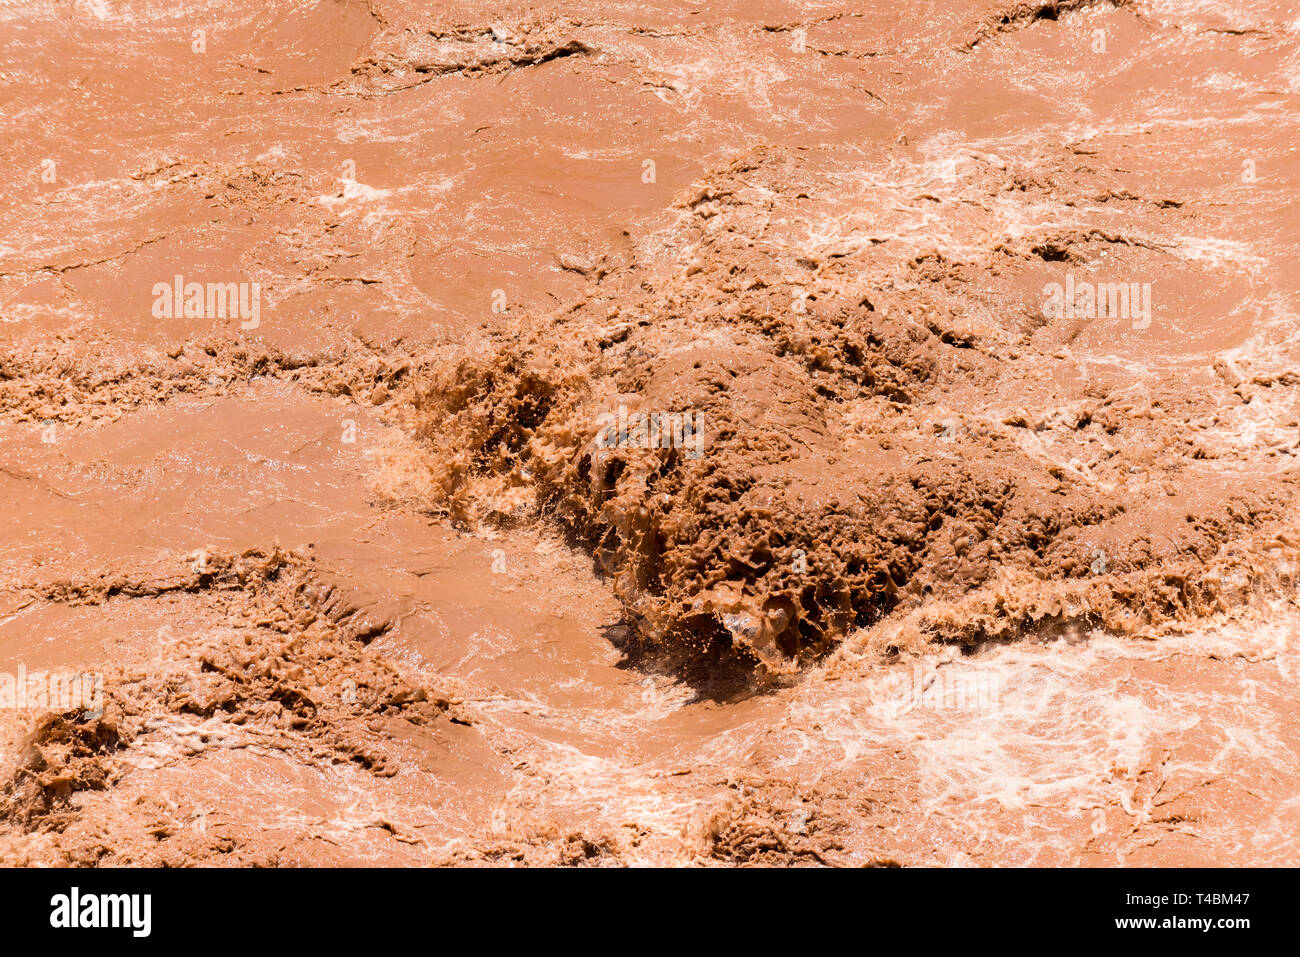 A section of the fast flowing, silt filled, Rio Mendoza, in the Andes, Argentina. Stock Photo